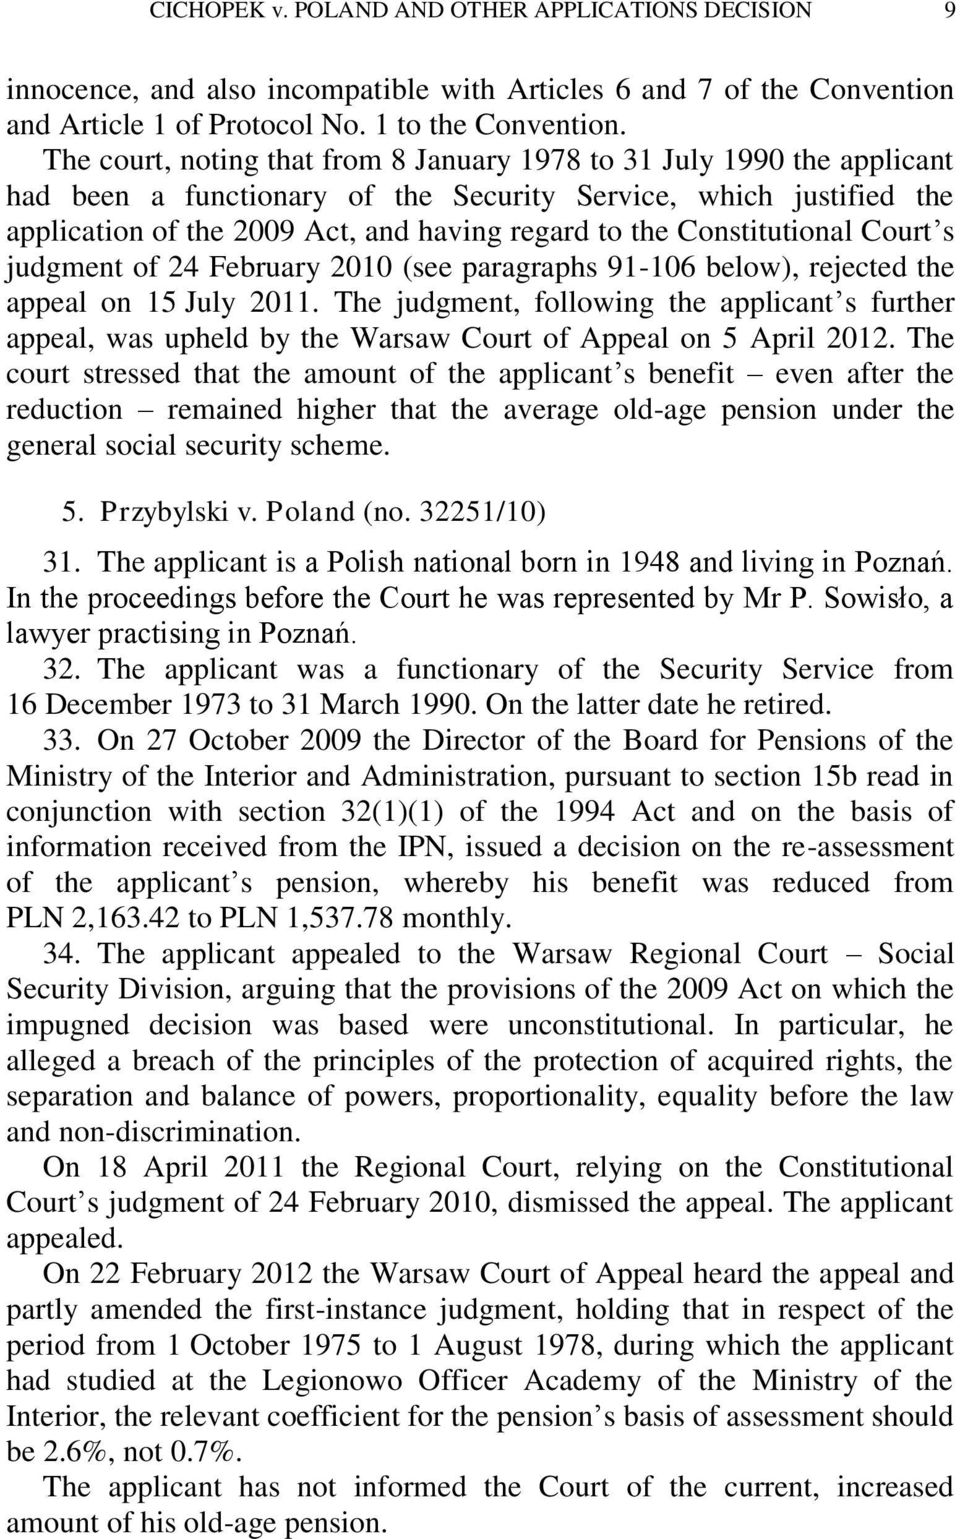 Constitutional Court s judgment of 24 February 2010 (see paragraphs 91-106 below), rejected the appeal on 15 July 2011.